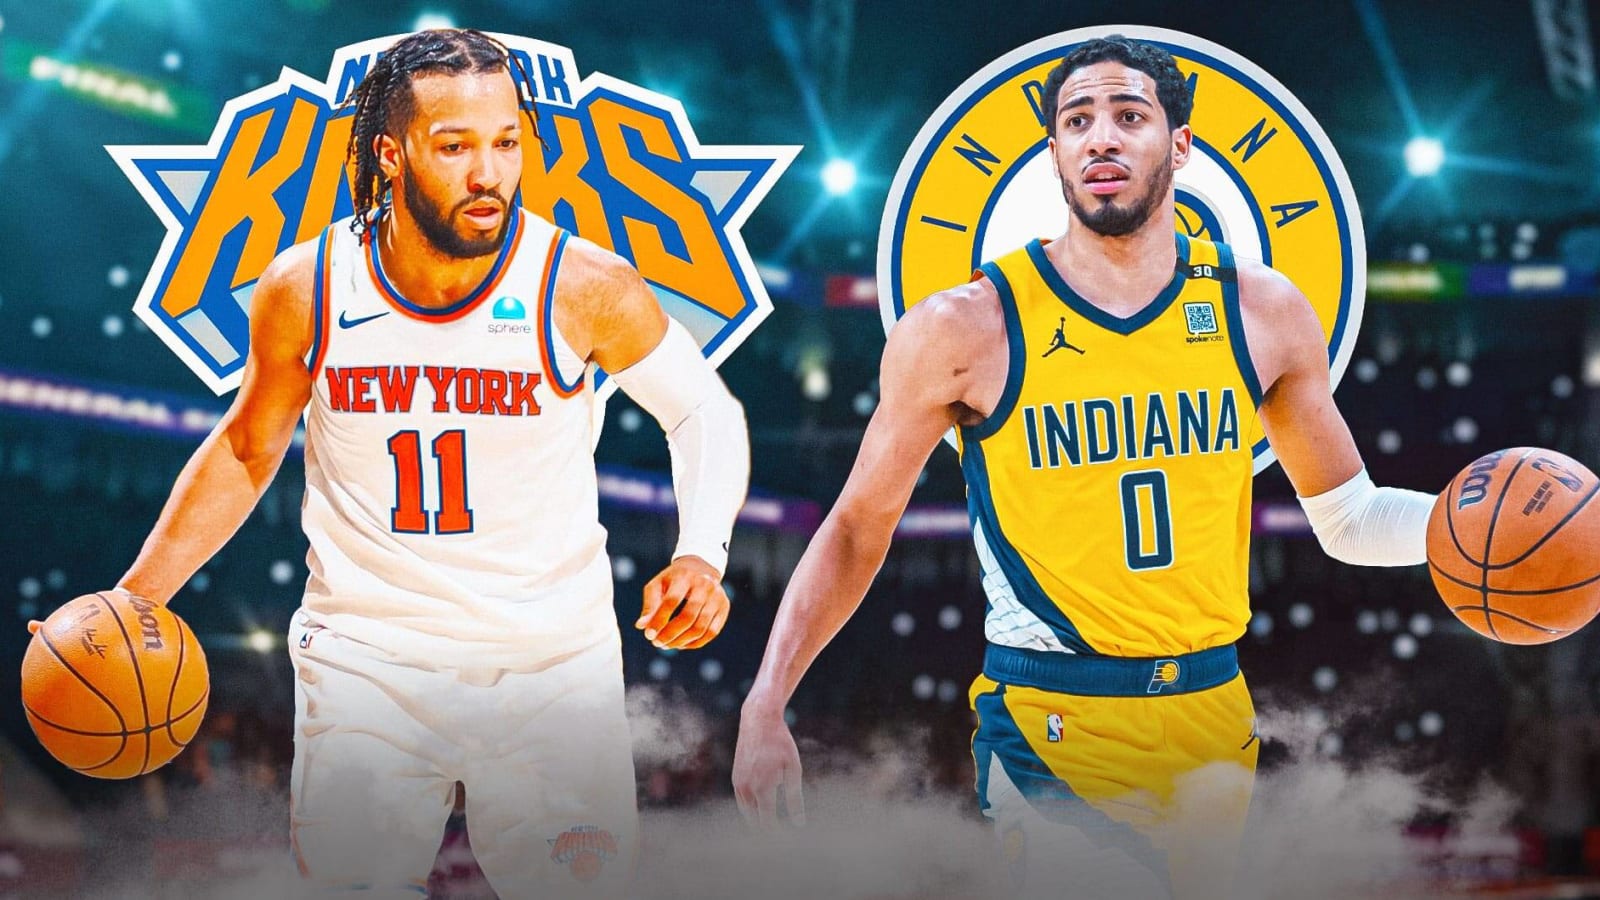 Adrian Wojnarowski delivers truth bomb amid injuries in Knicks, Pacers series